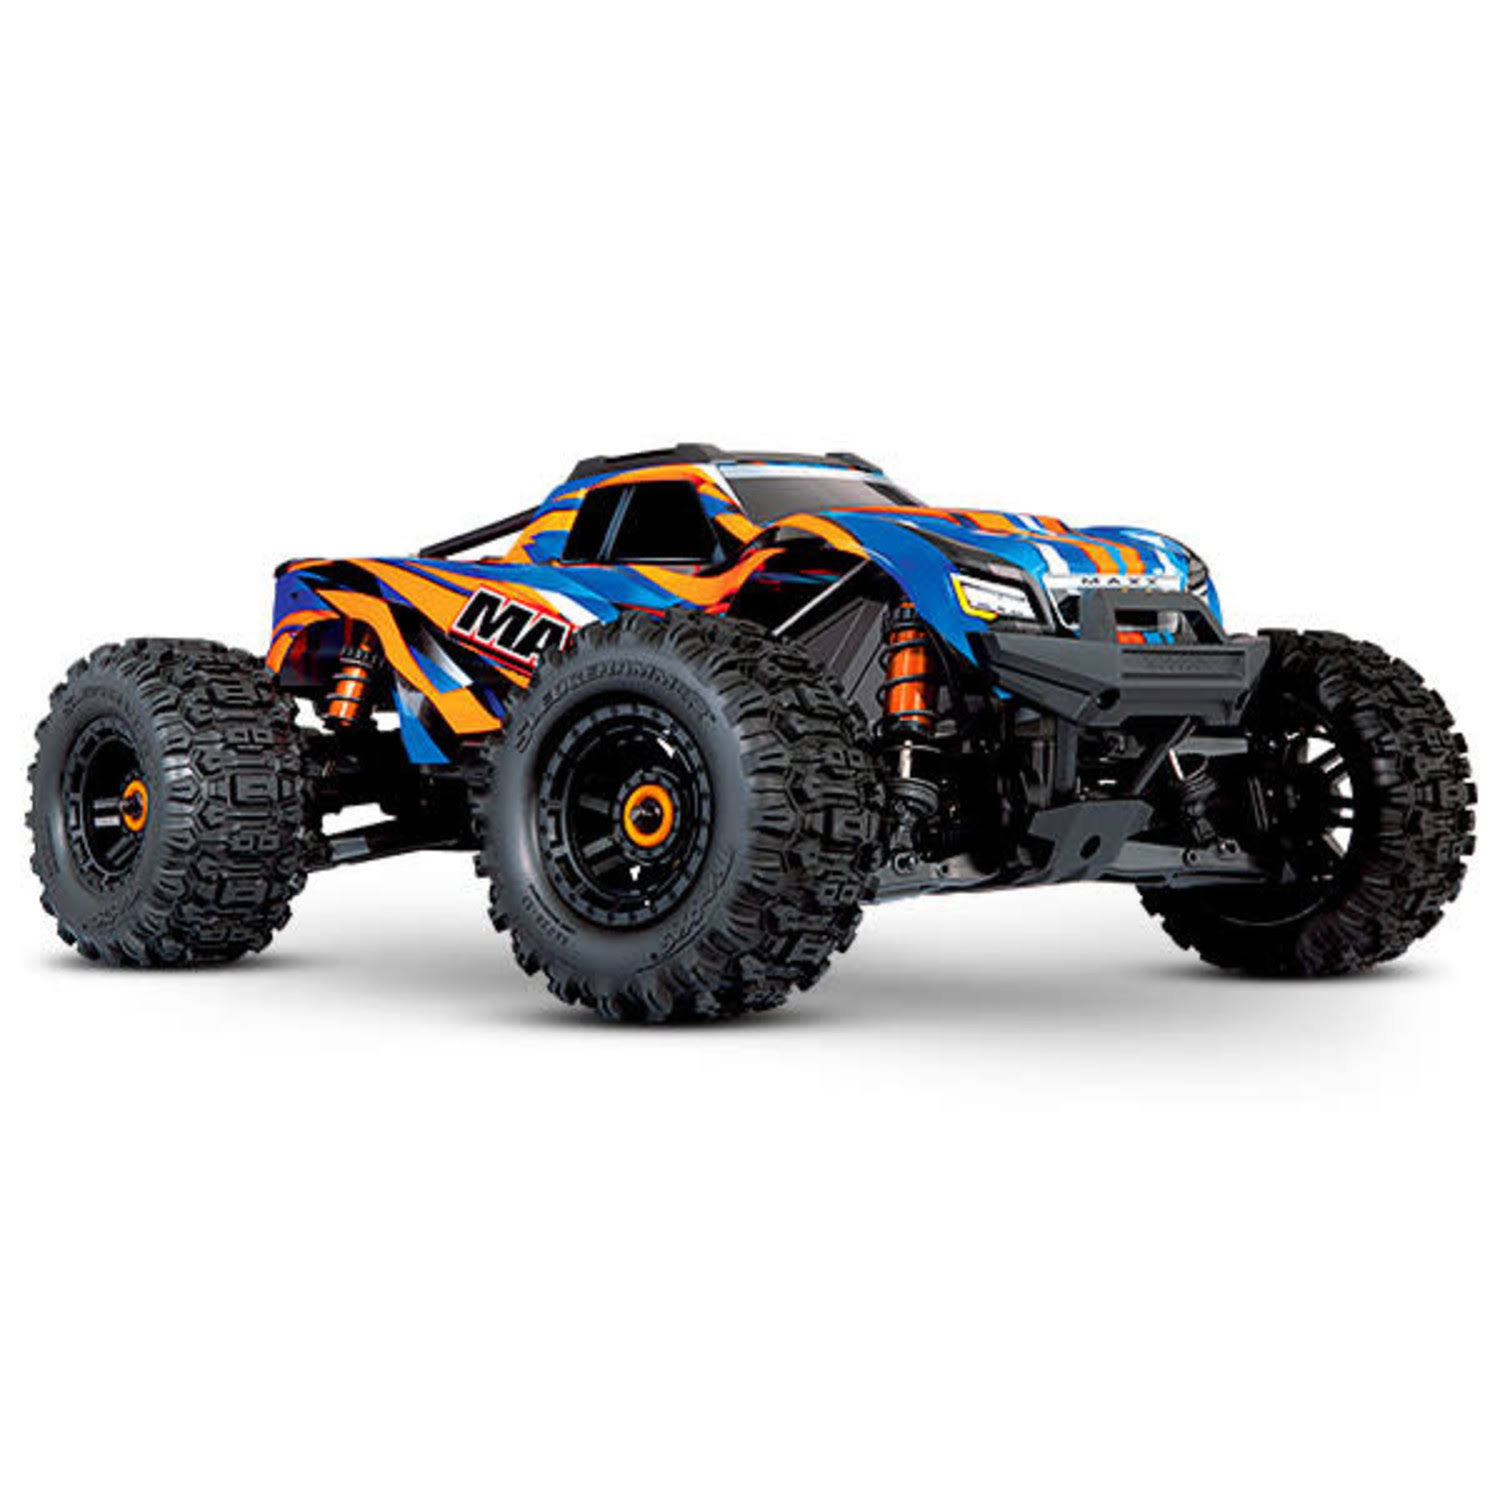 Traxxas 89086-4 Maxx V2 With Widemaxx 1/10 Electric RC Monster Truck Orange